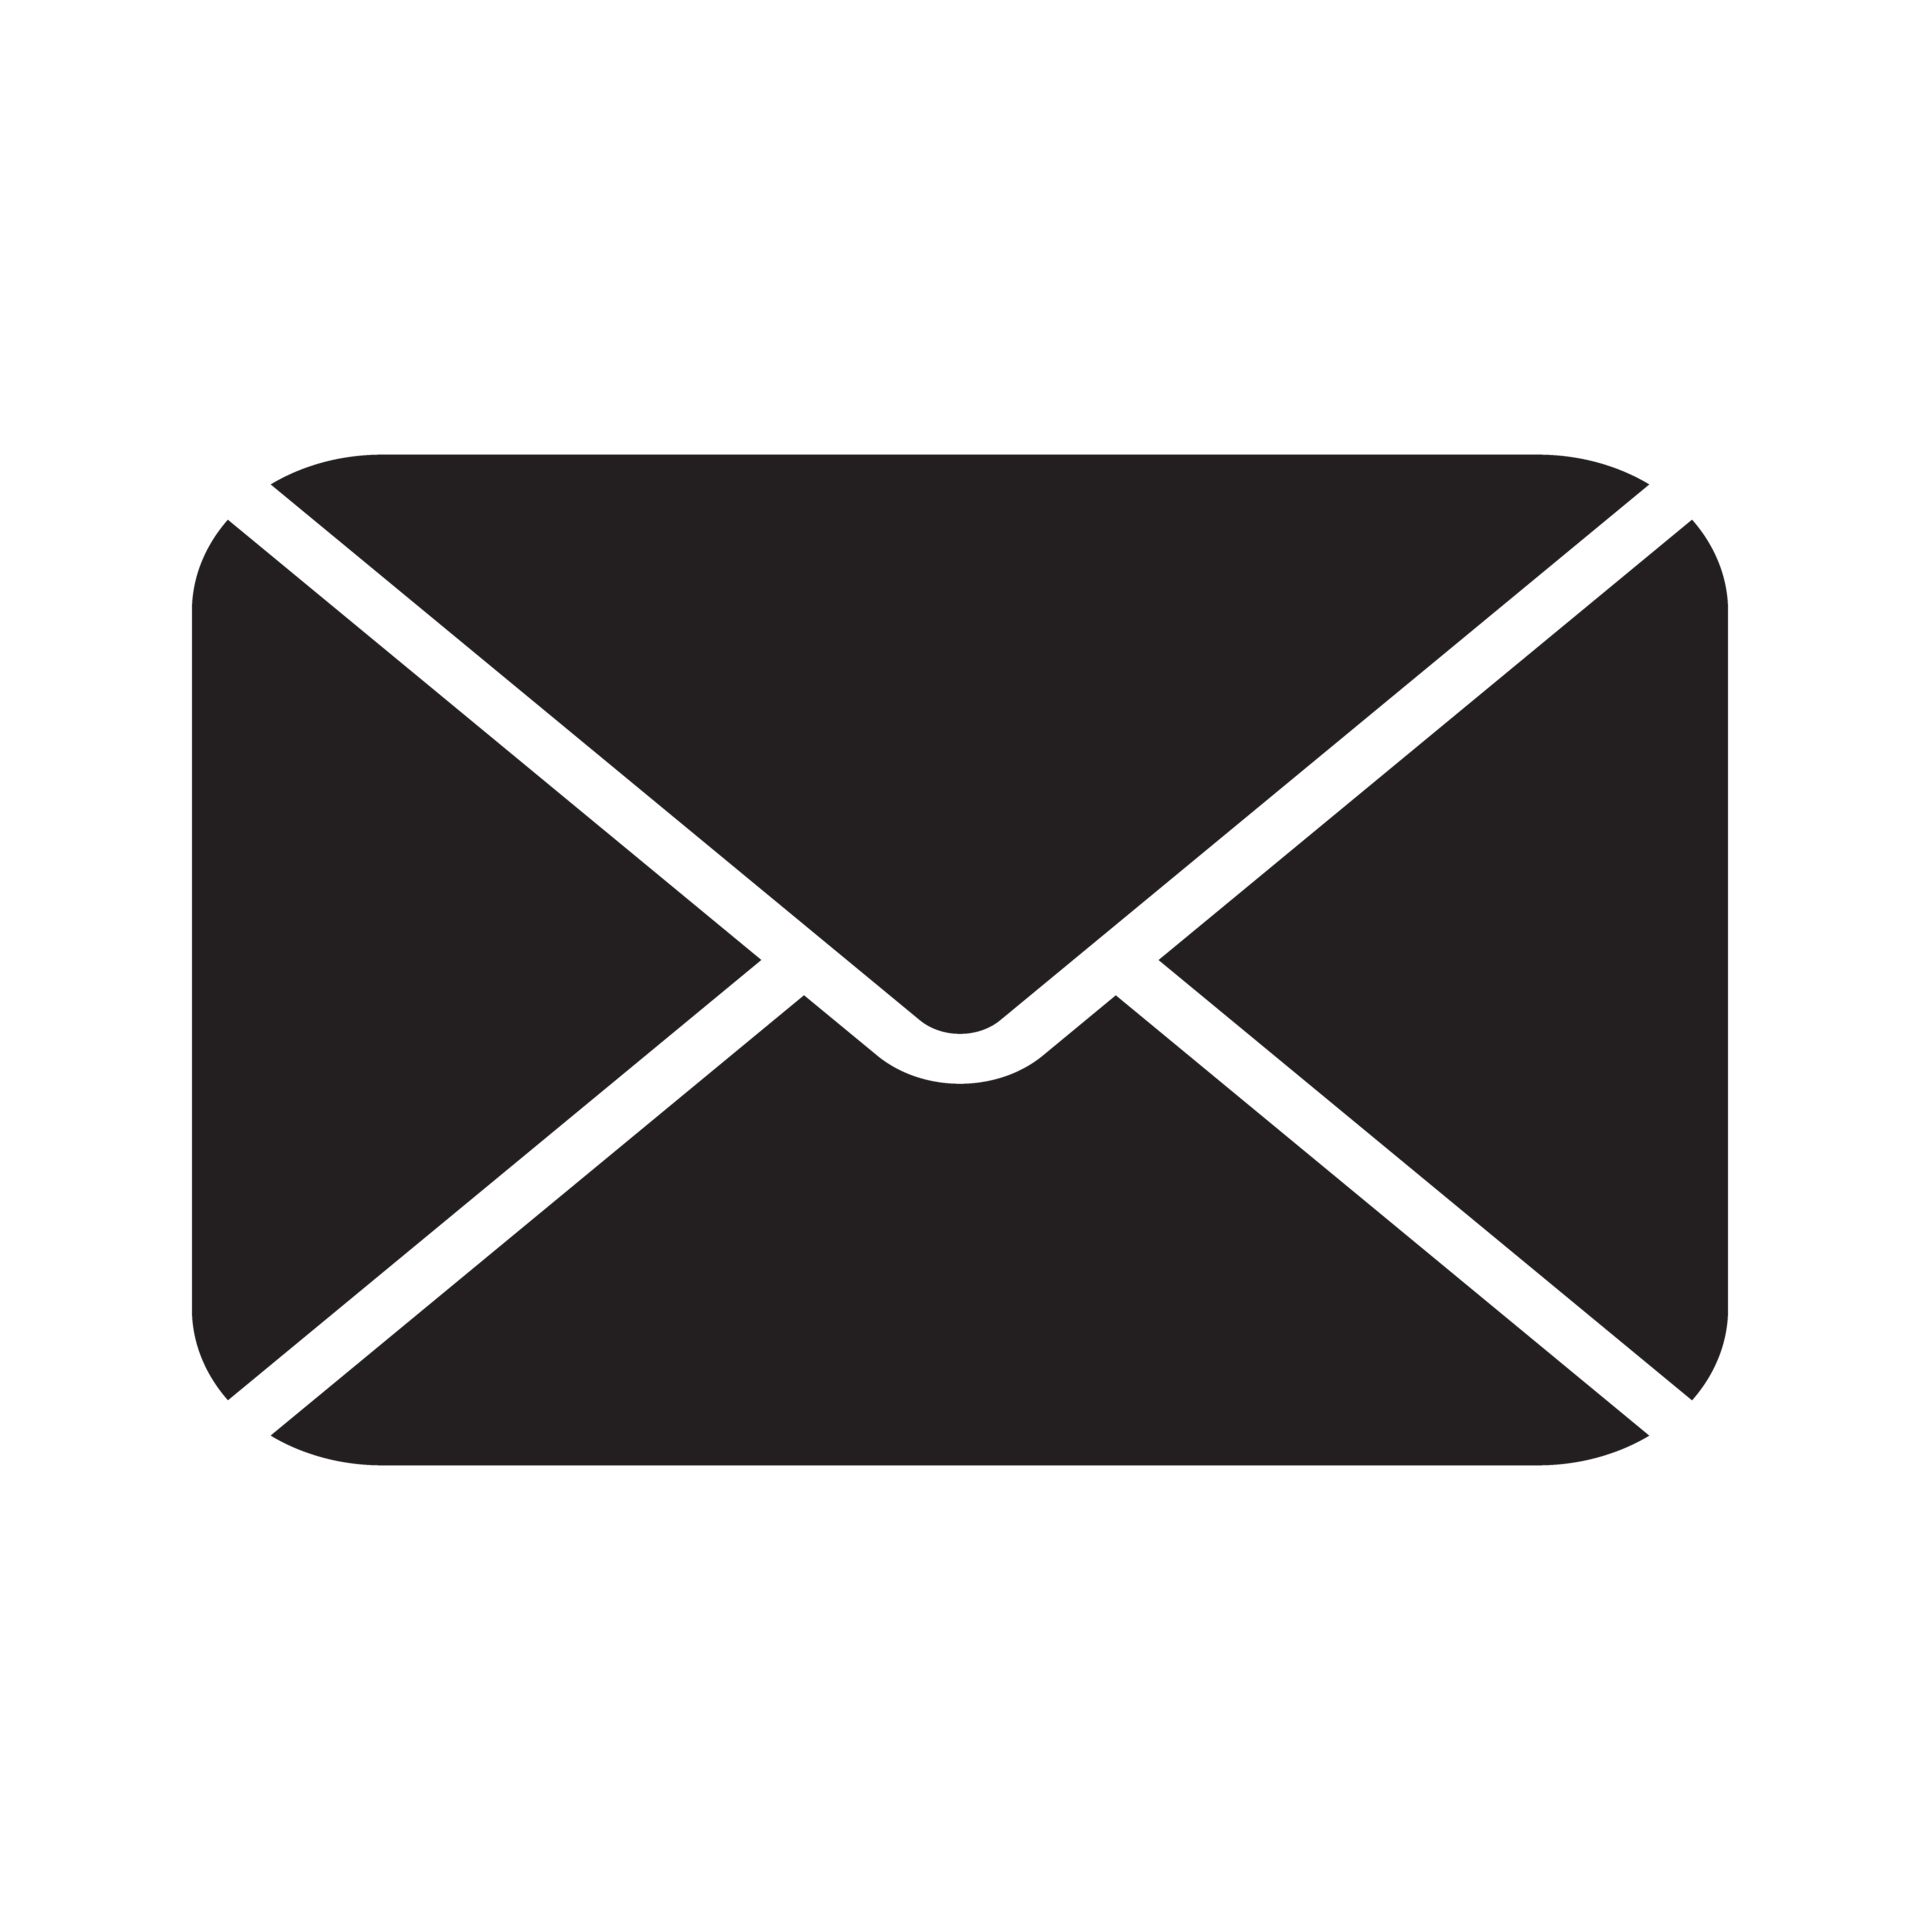 email-and-mail-icon-black-free-png